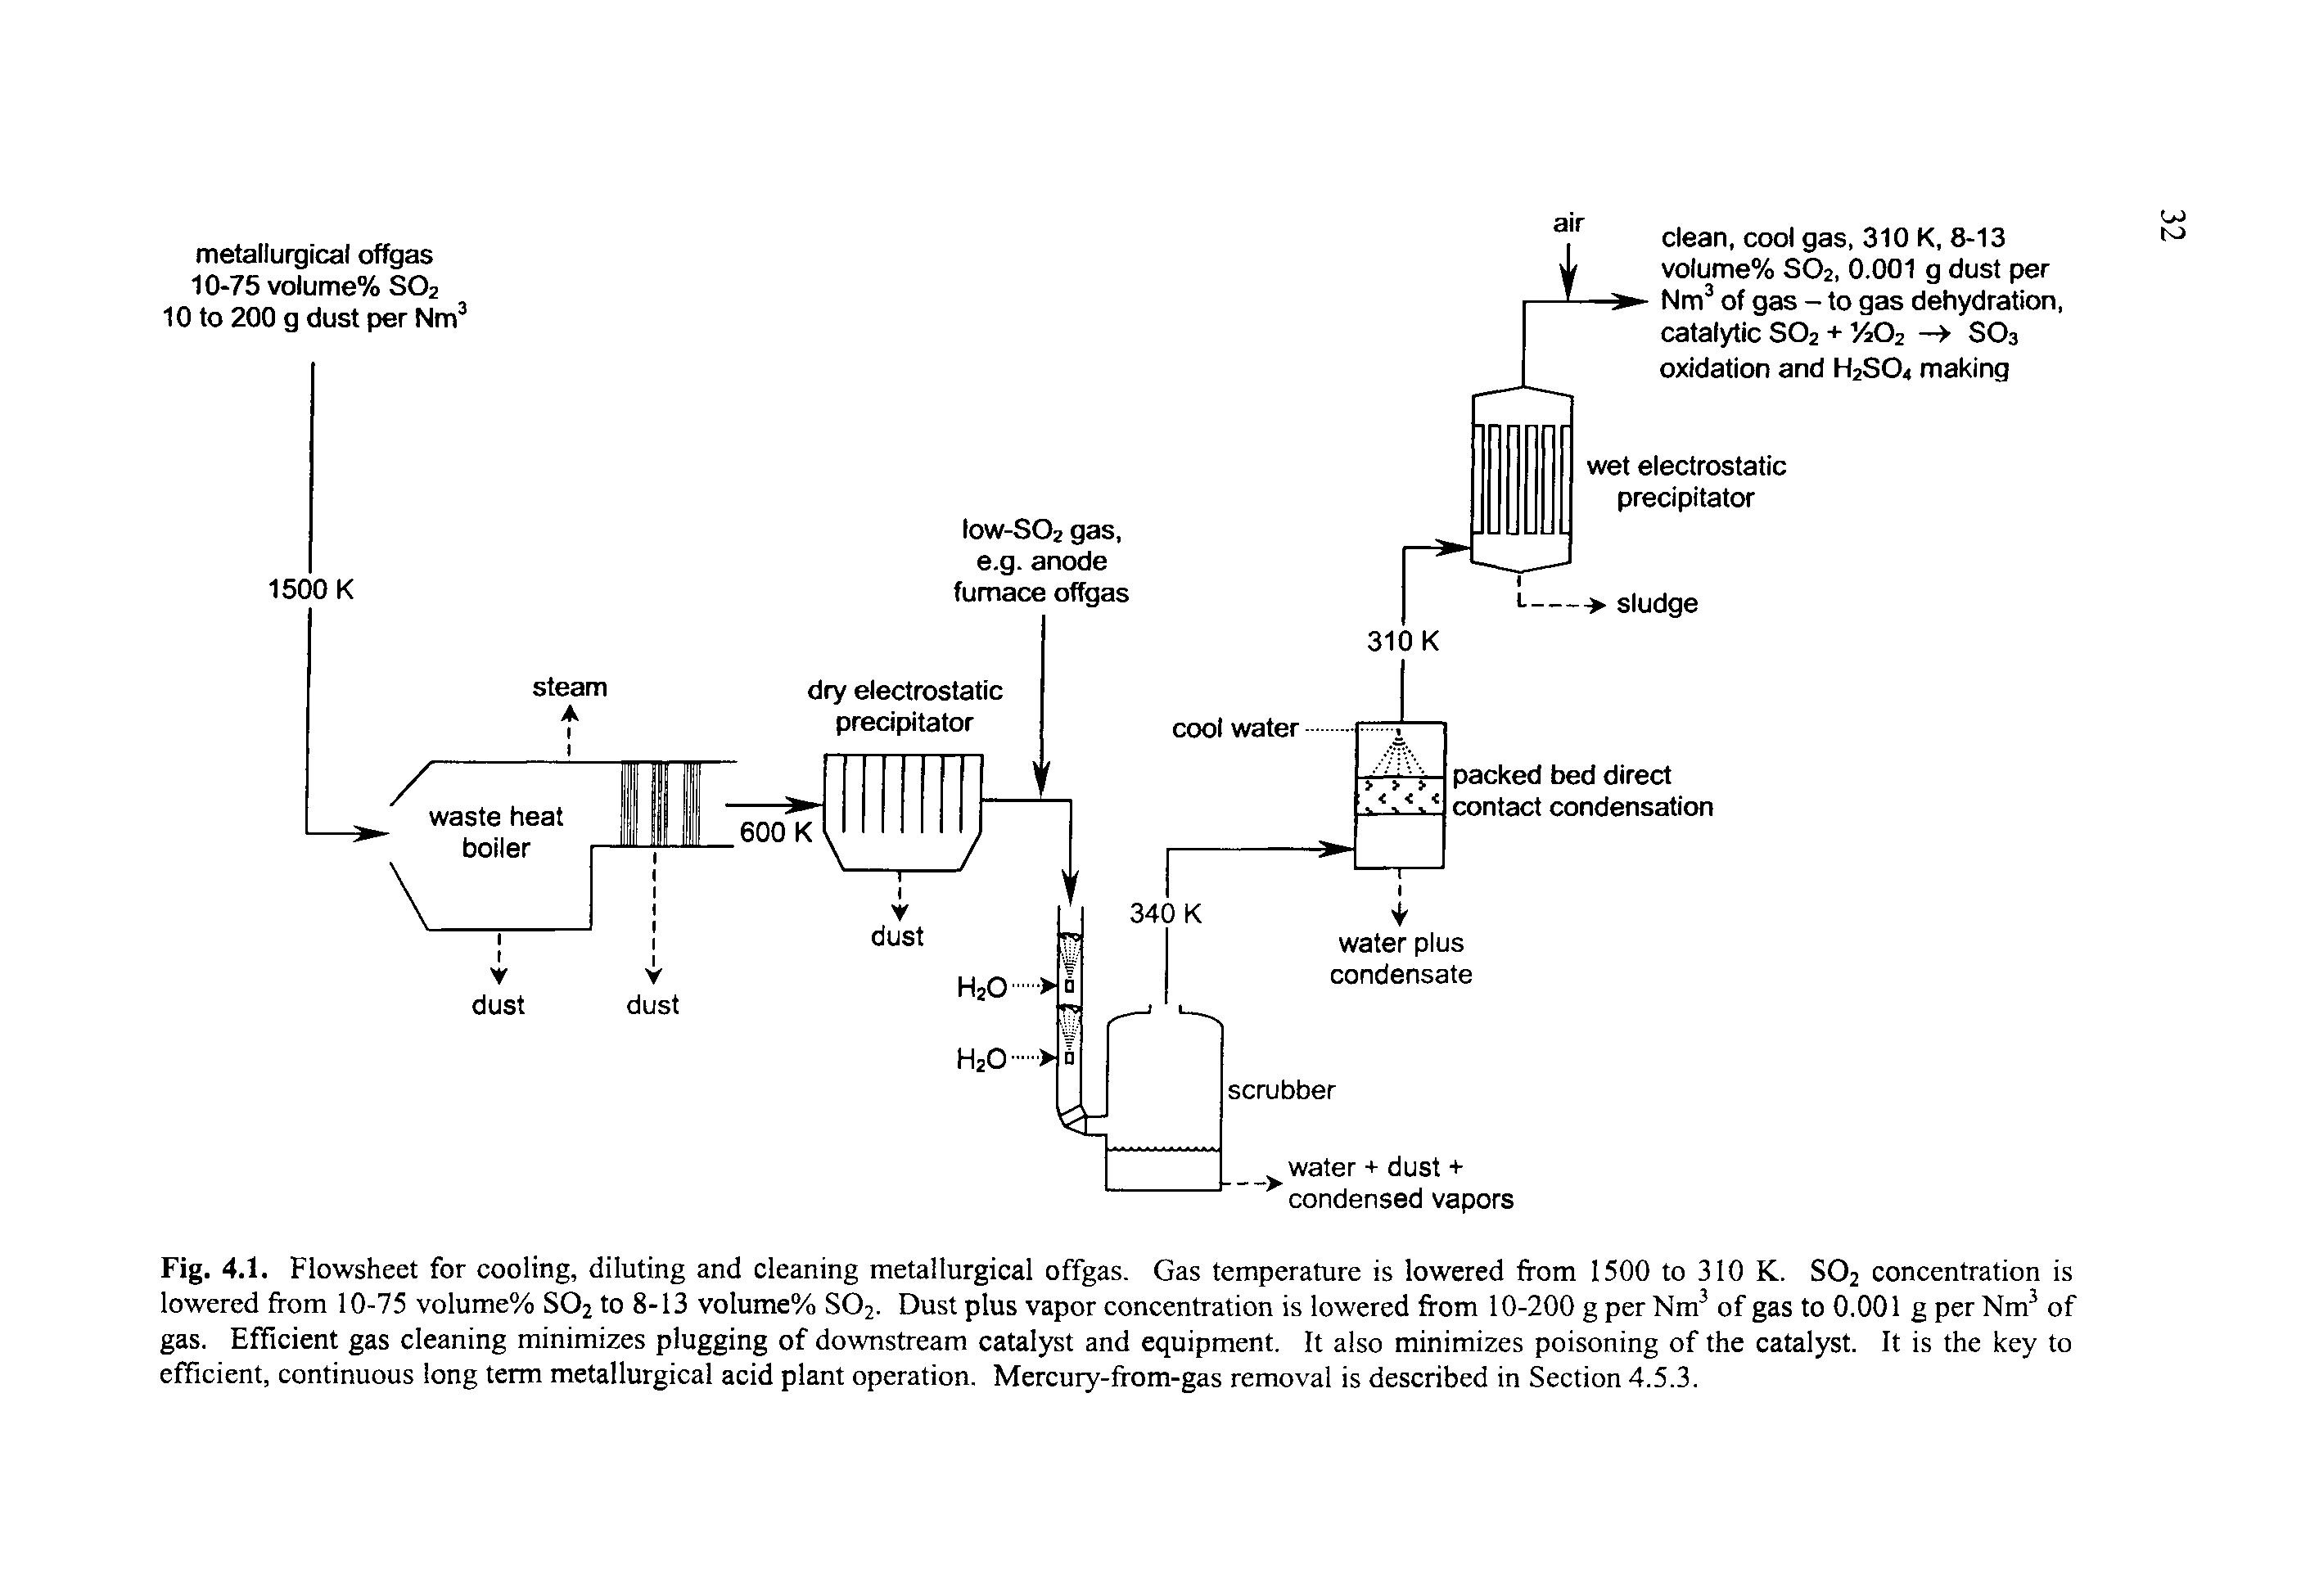 Fig. 4.1. Flowsheet for cooling, diluting and cleaning metallurgical offgas. Gas temperature is lowered from 1500 to 310 K. S02 concentration is lowered from 10-75 volume% S02 to 8-13 volume% S02. Dust plus vapor concentration is lowered from 10-200 g per Nm3 of gas to 0.001 g per Nm3 of gas. Efficient gas cleaning minimizes plugging of downstream catalyst and equipment. It also minimizes poisoning of the catalyst. It is the key to efficient, continuous long term metallurgical acid plant operation. Mercury-from-gas removal is described in Section 4.5.3.